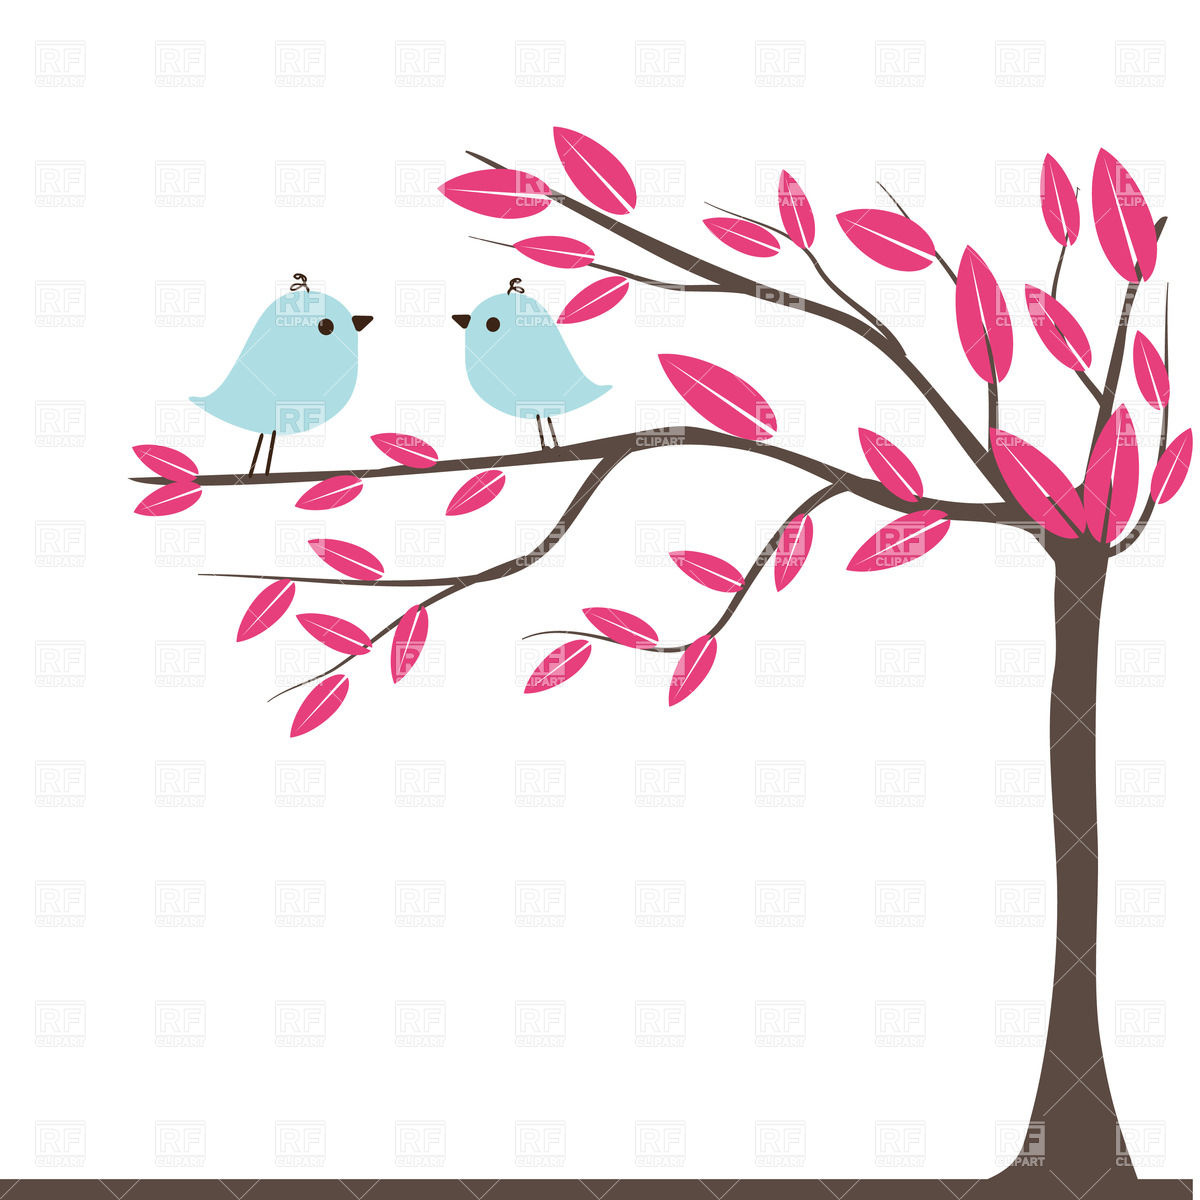     Tree 21430 Plants And Animals Download Royalty Free Vector Clipart